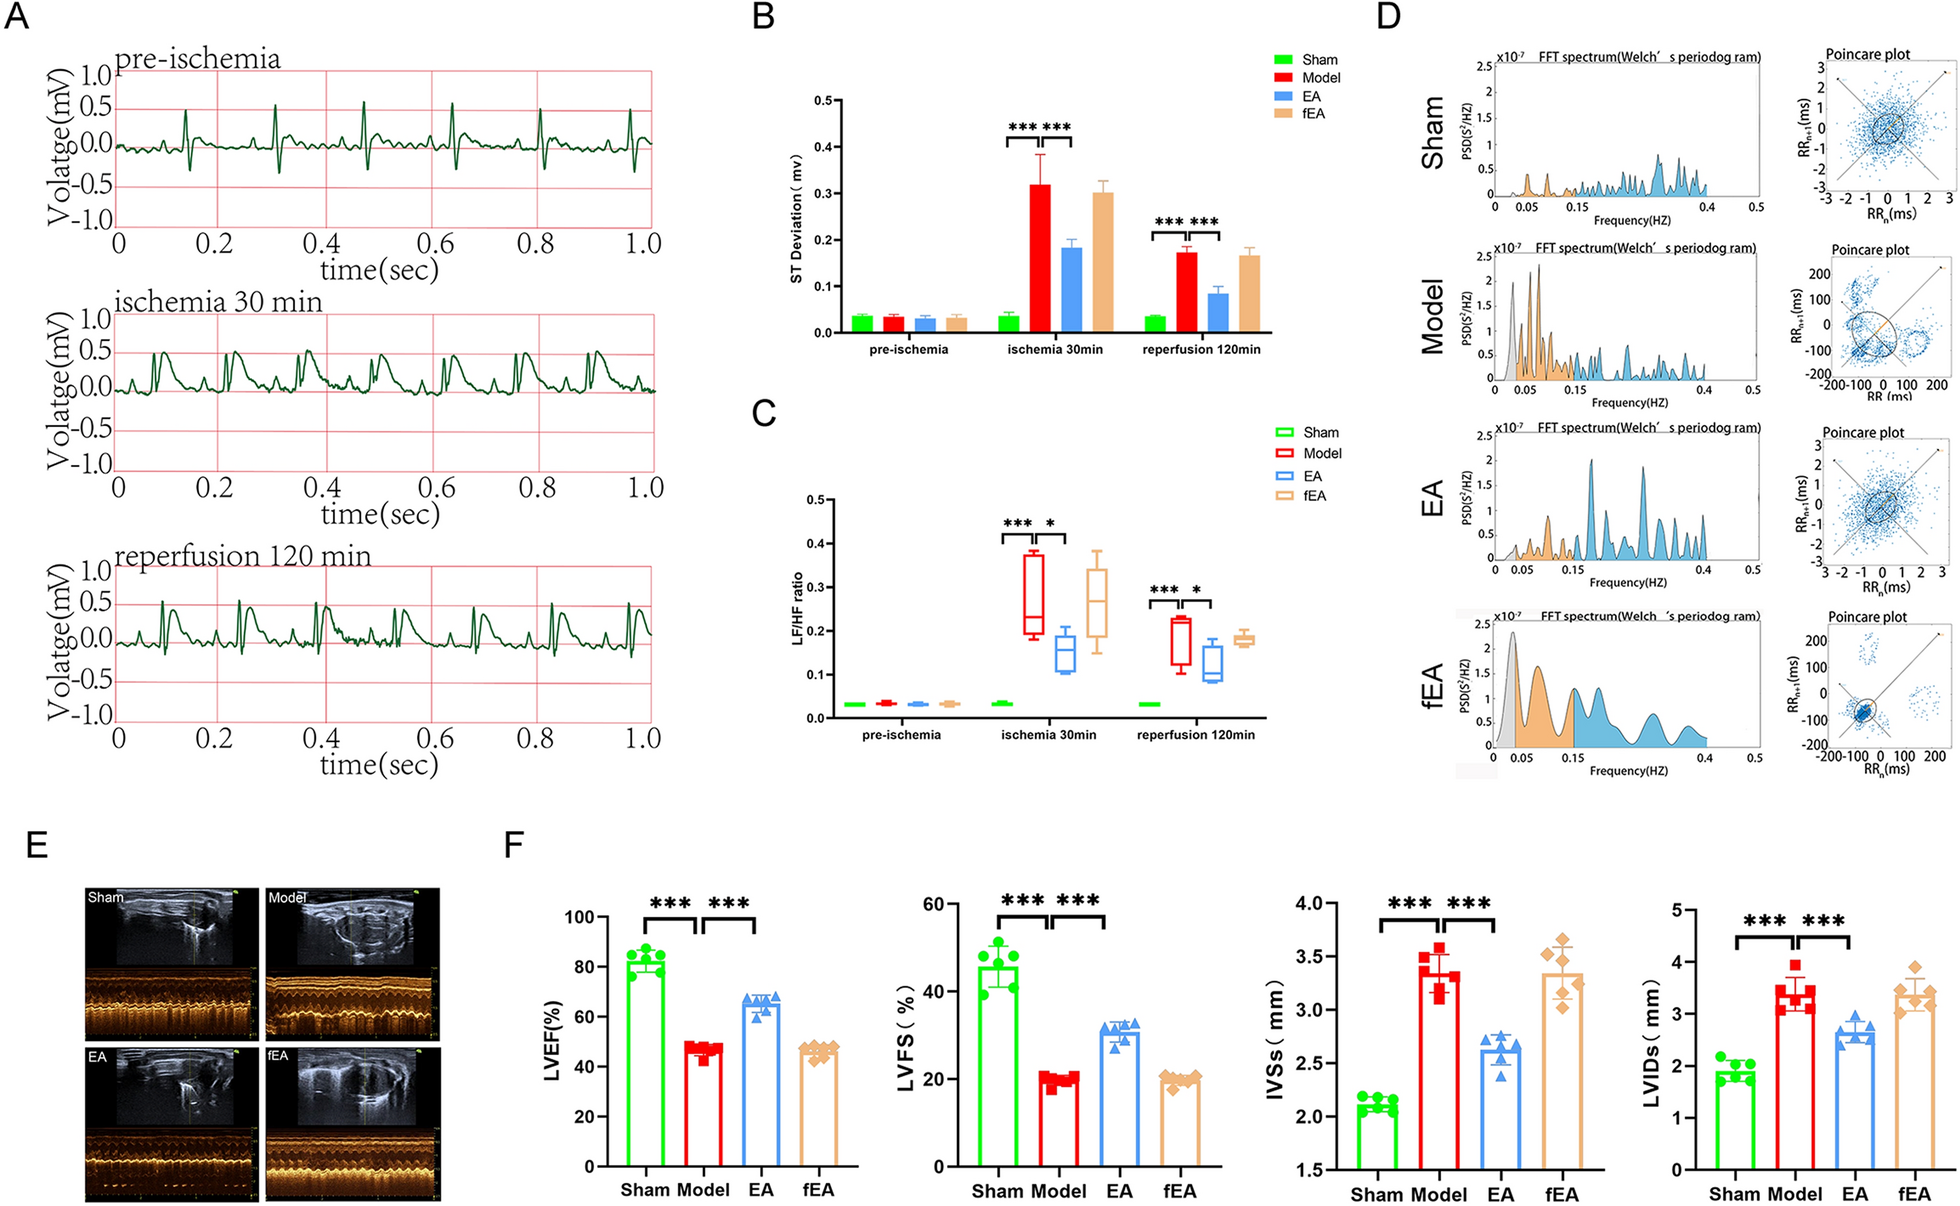 Electroacupuncture pretreatment mediates sympathetic nerves to alleviate myocardial ischemia–reperfusion injury via CRH neurons in the paraventricular nucleus of the hypothalamus